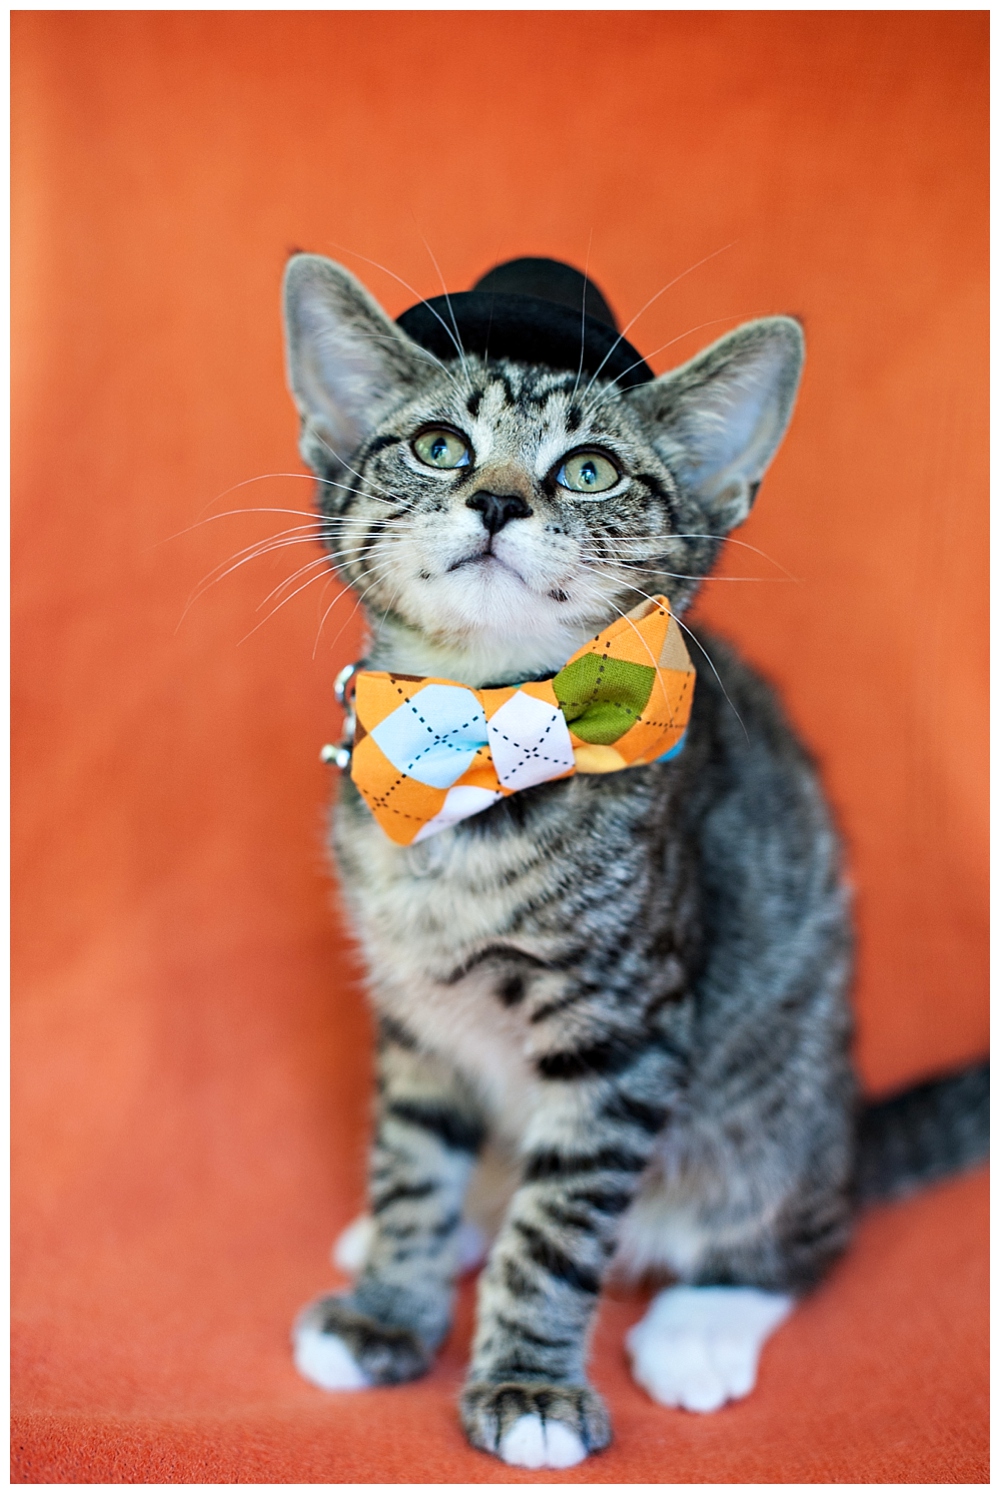 tiger striped kitten with a bow tie and top hat